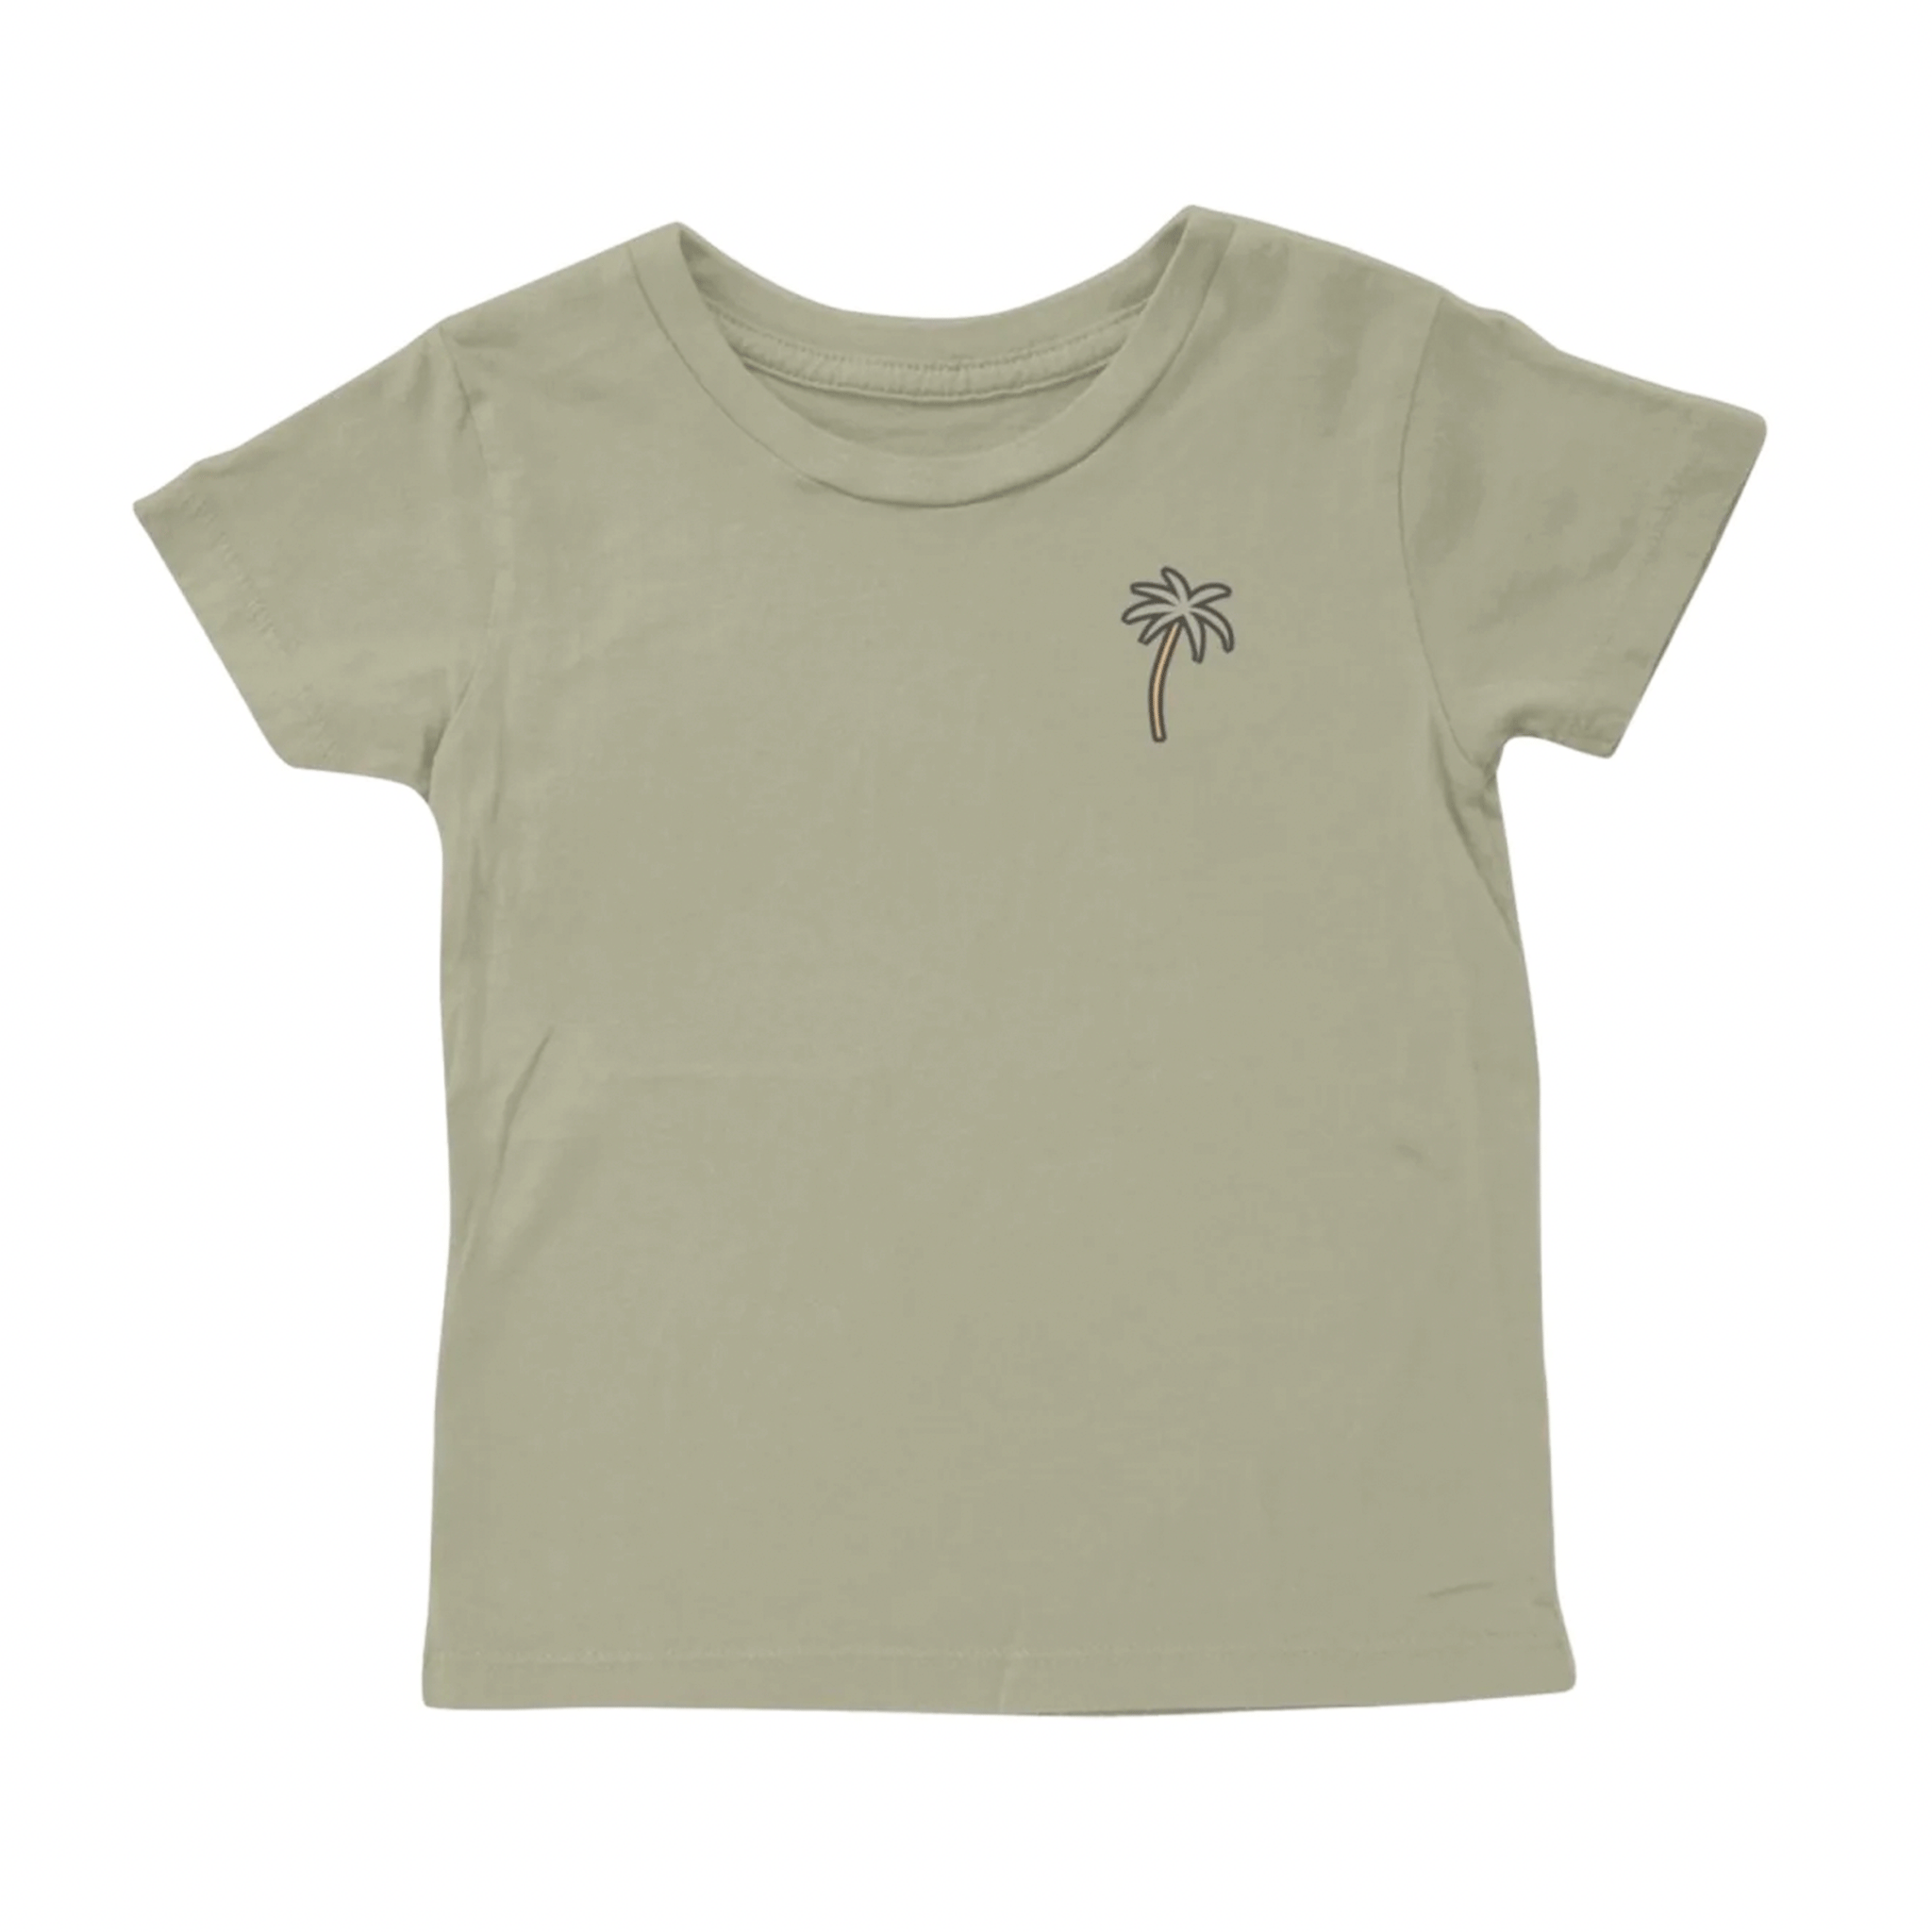 On a white background is a sage green children's t-shirt with a cowboy skull graphic on the back with text arched above the graphic that reads, "Best In The West".